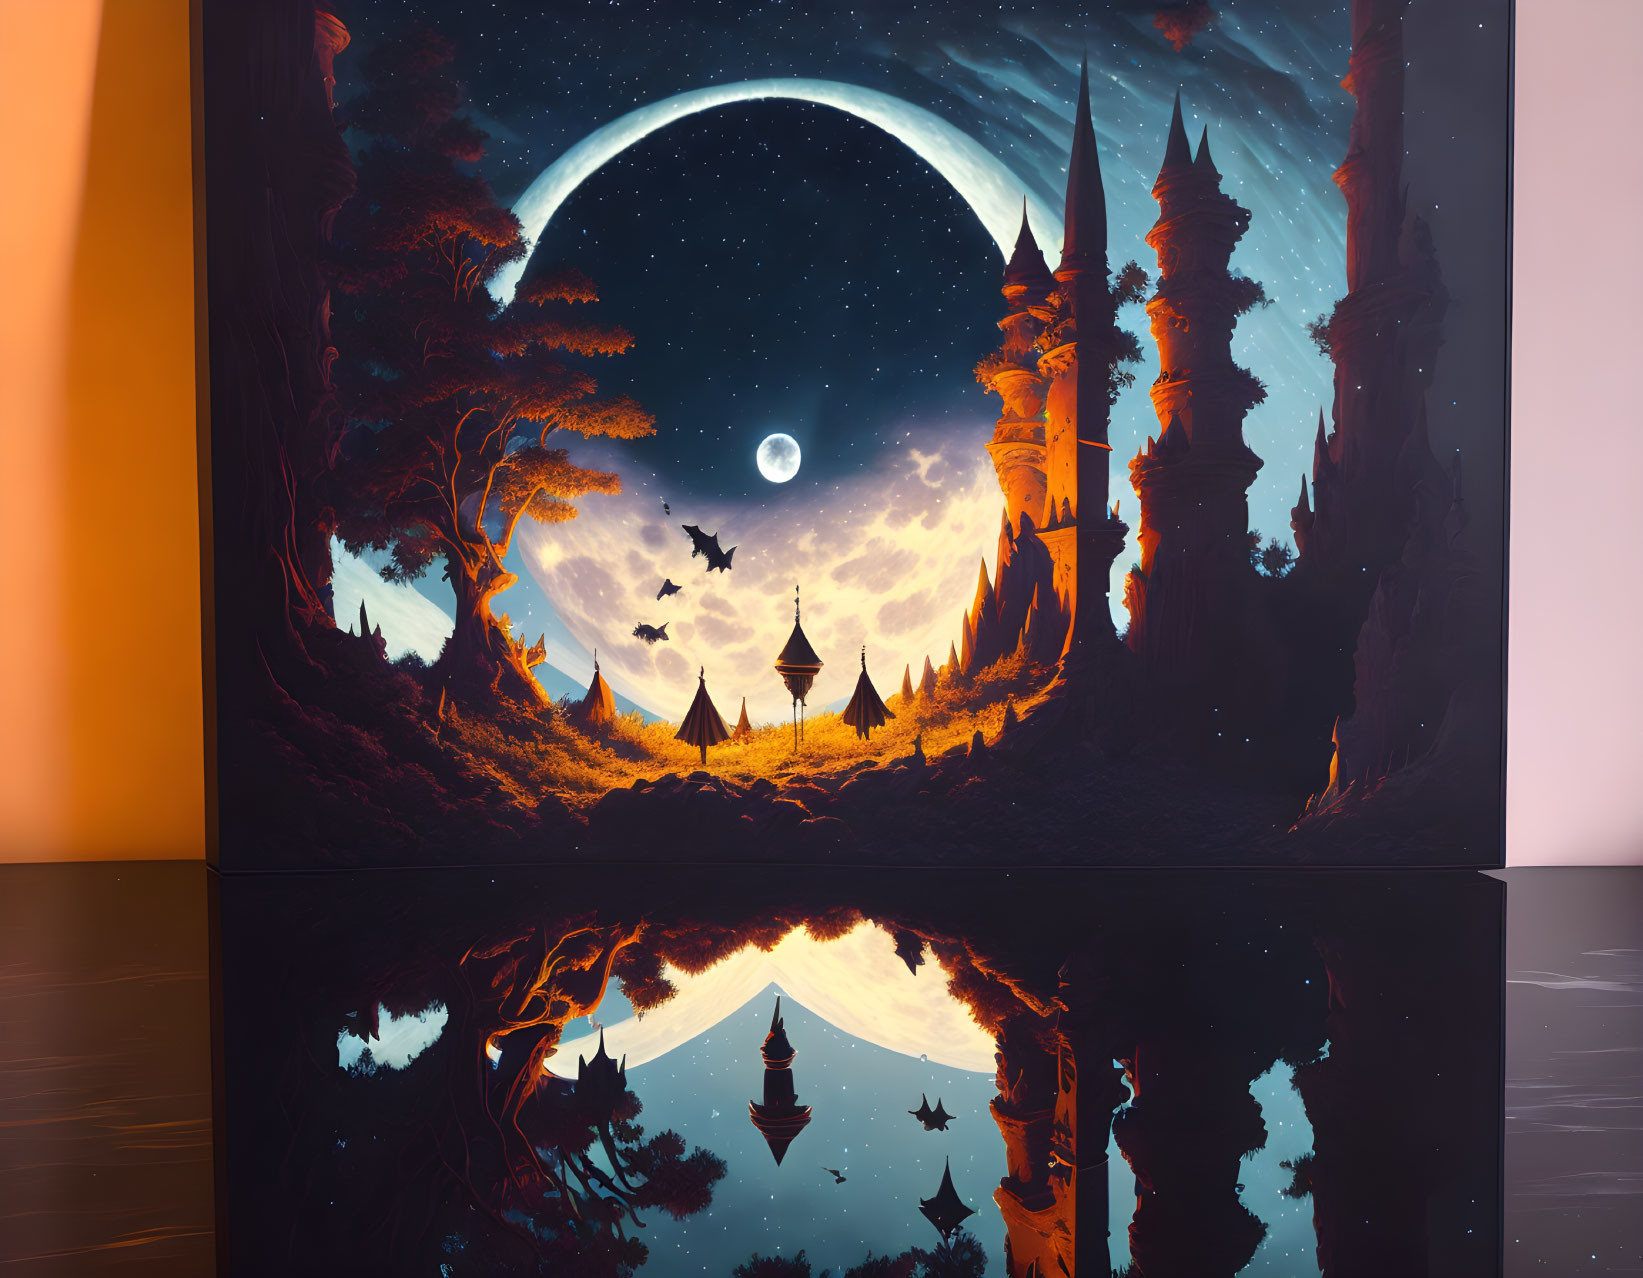 Moonlit fantasy landscape painting with towering spires and reflective surface